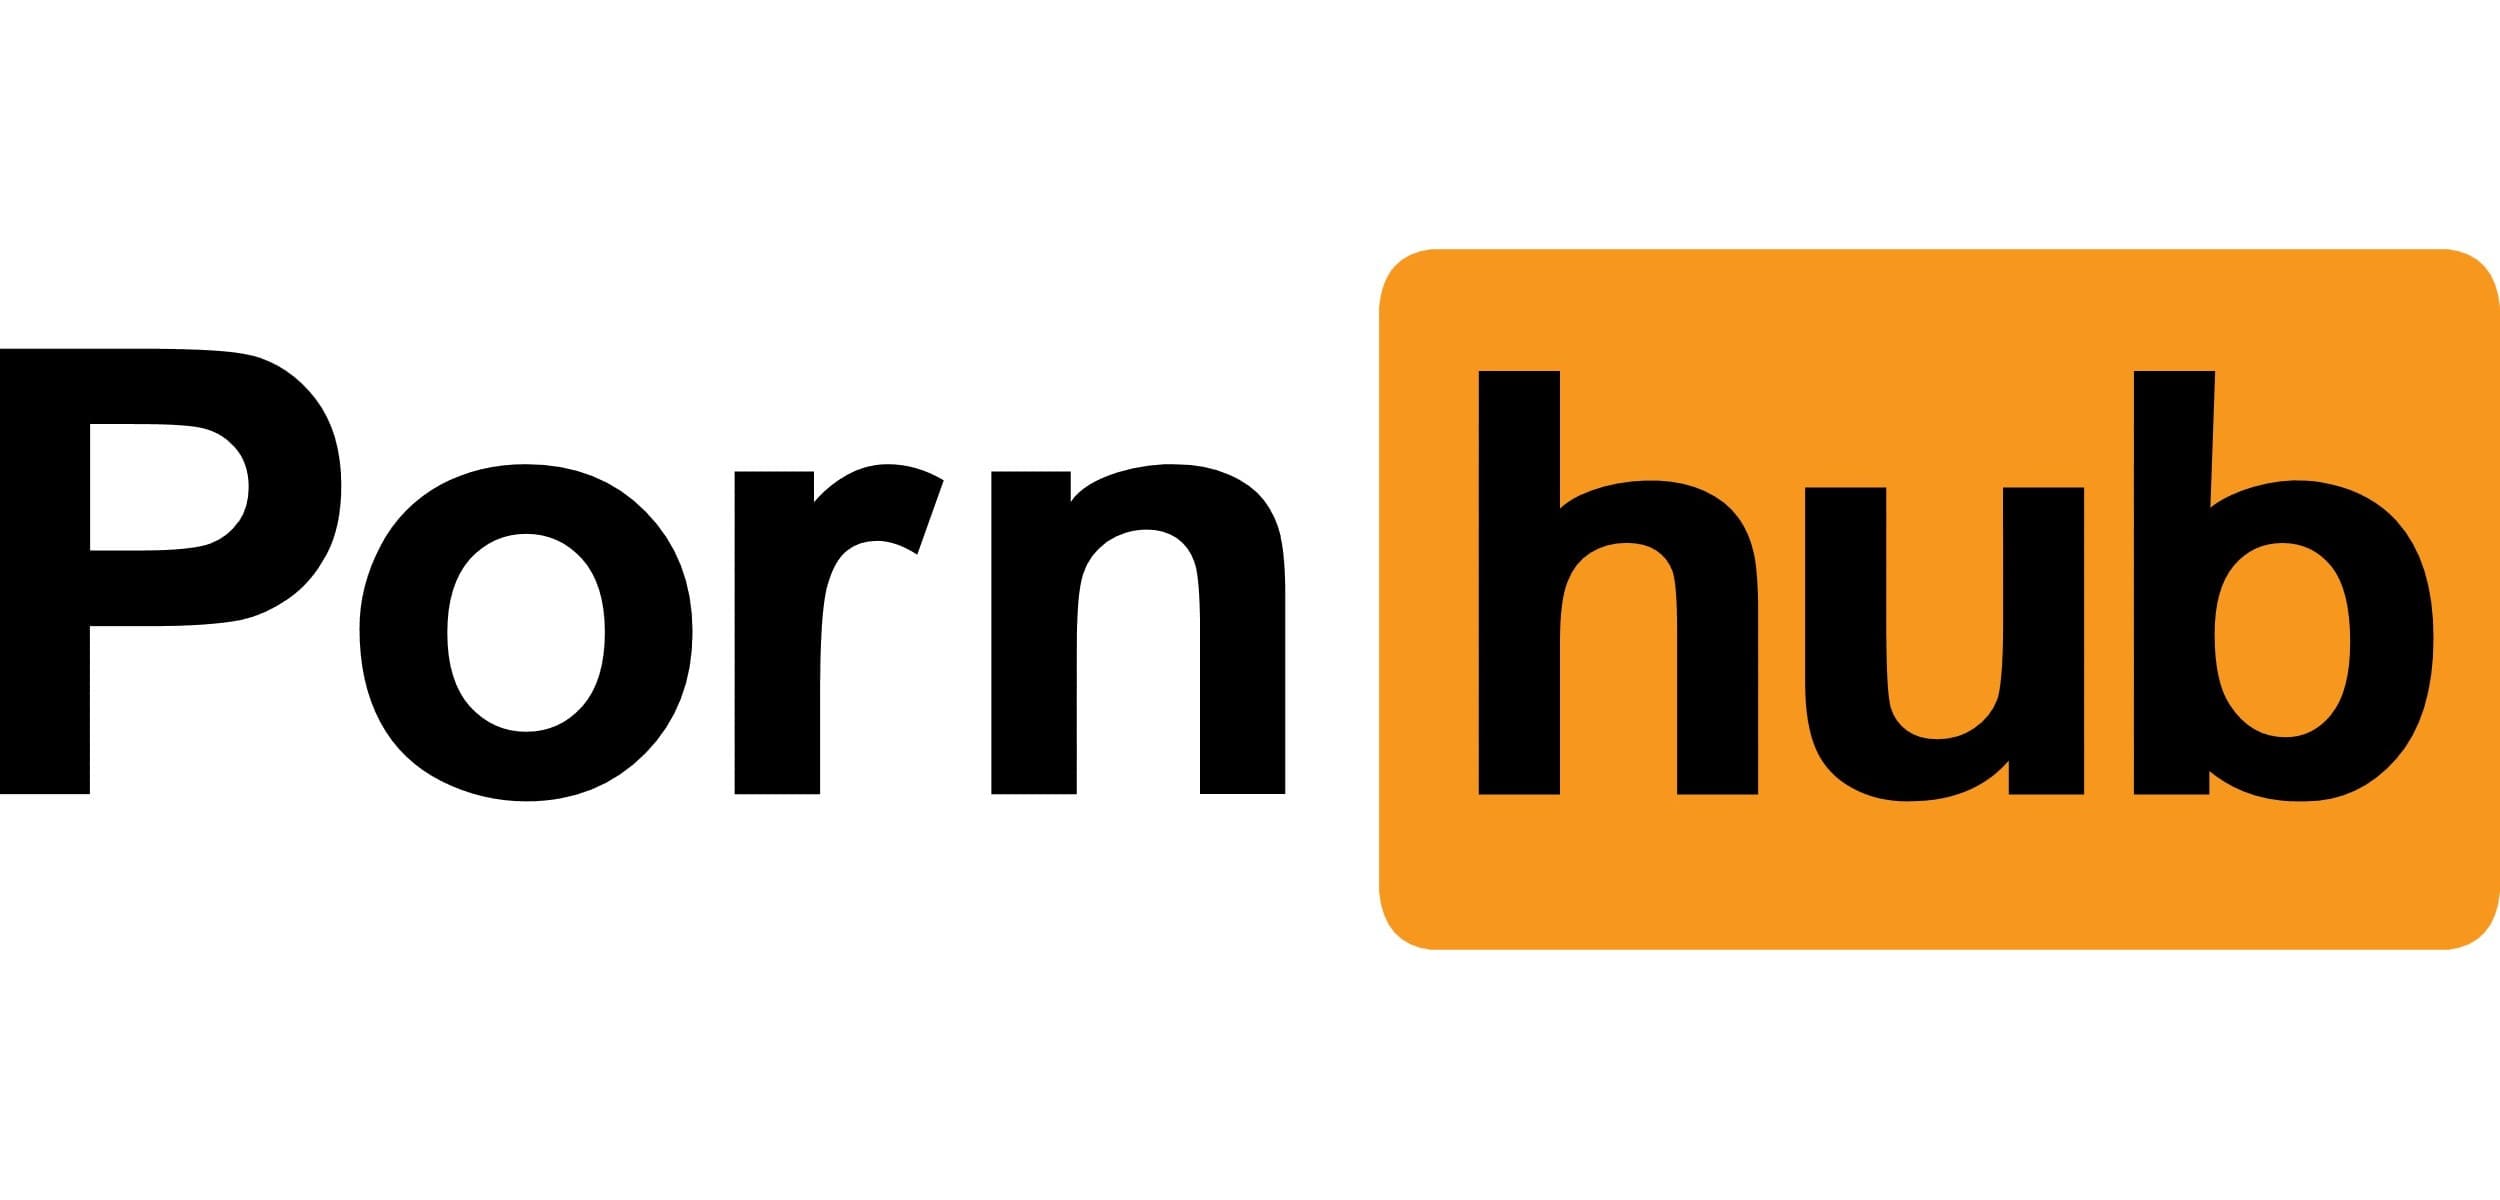 What is the most popular pornhub video